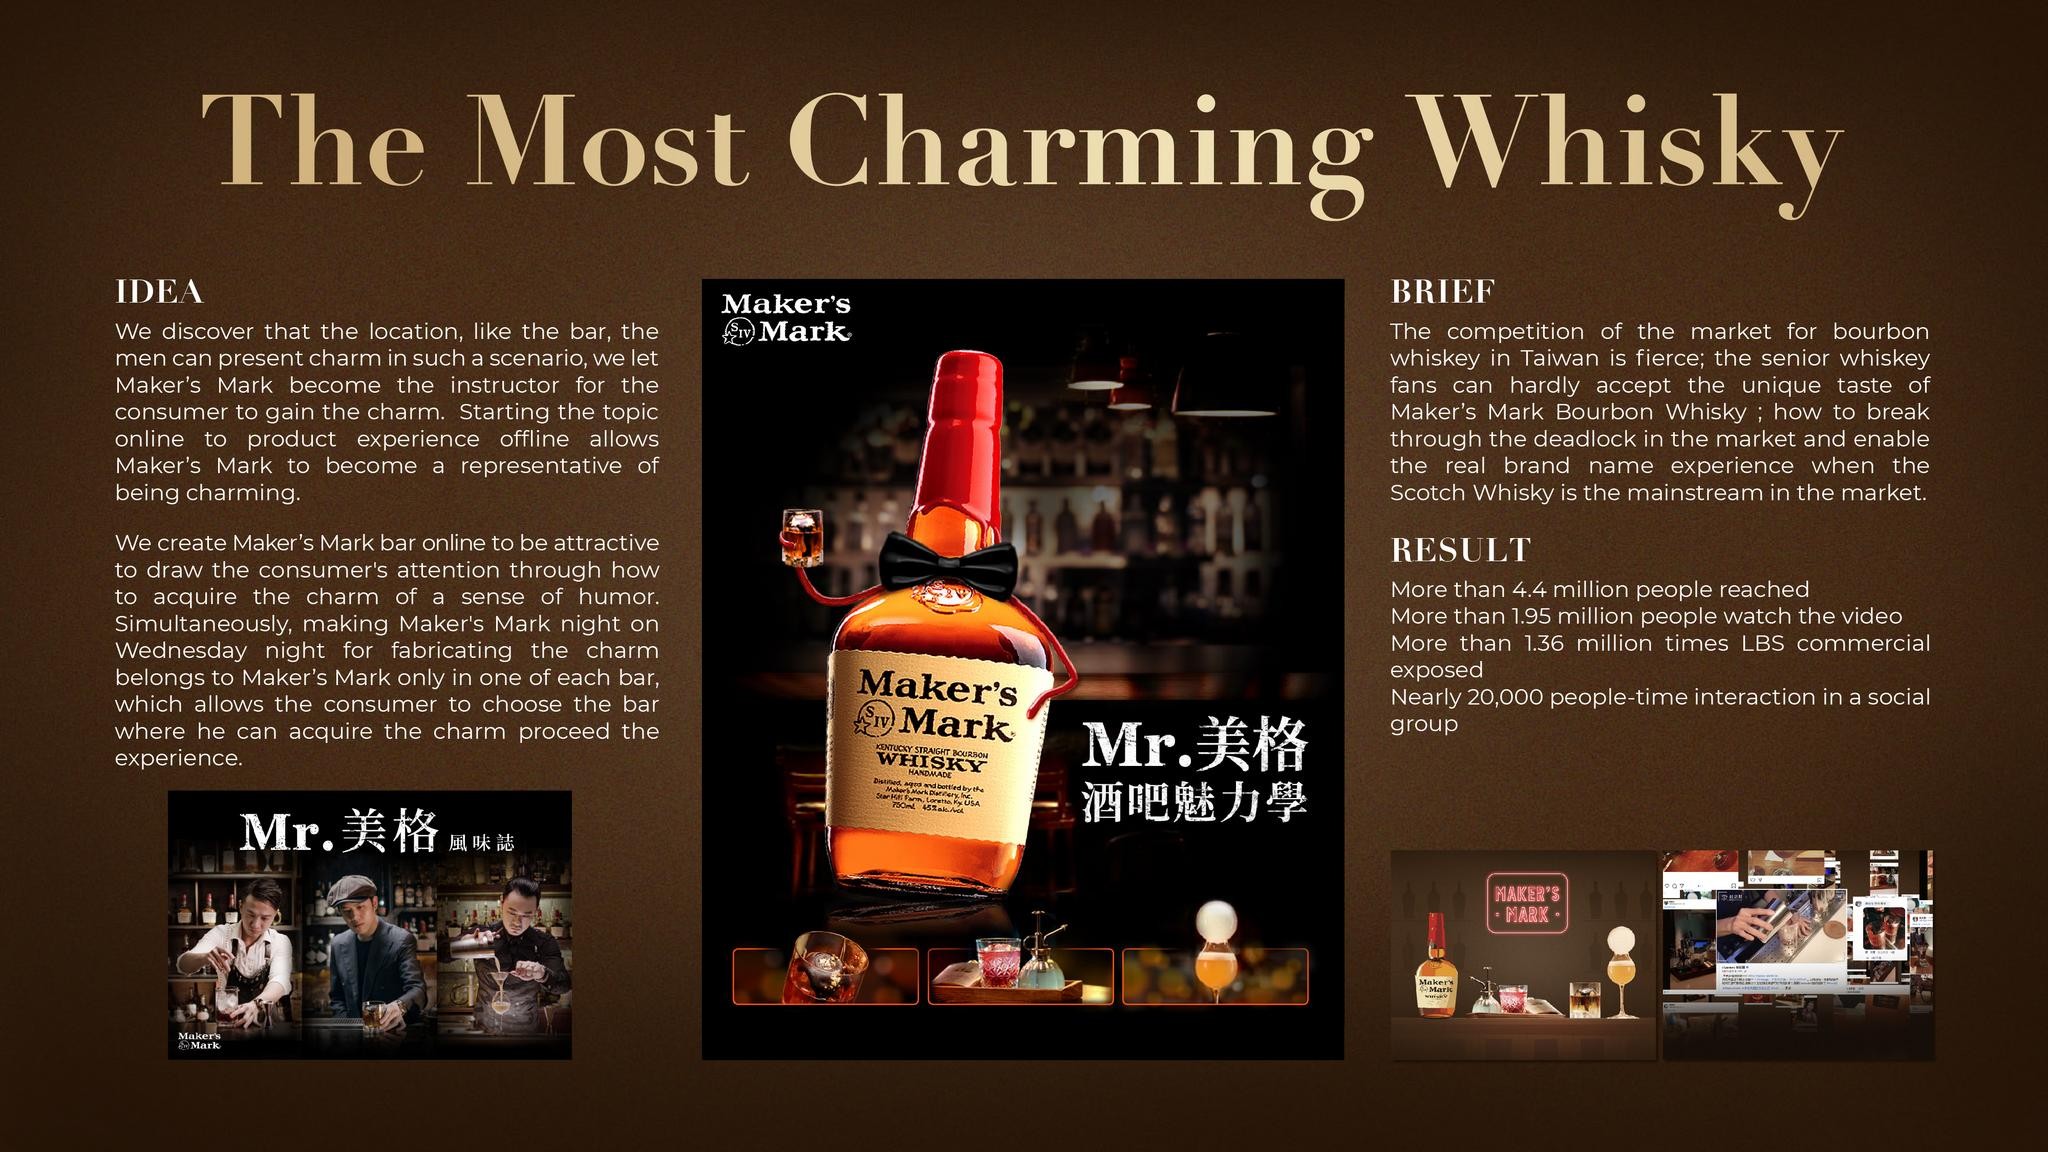 The Most Charming Whisky